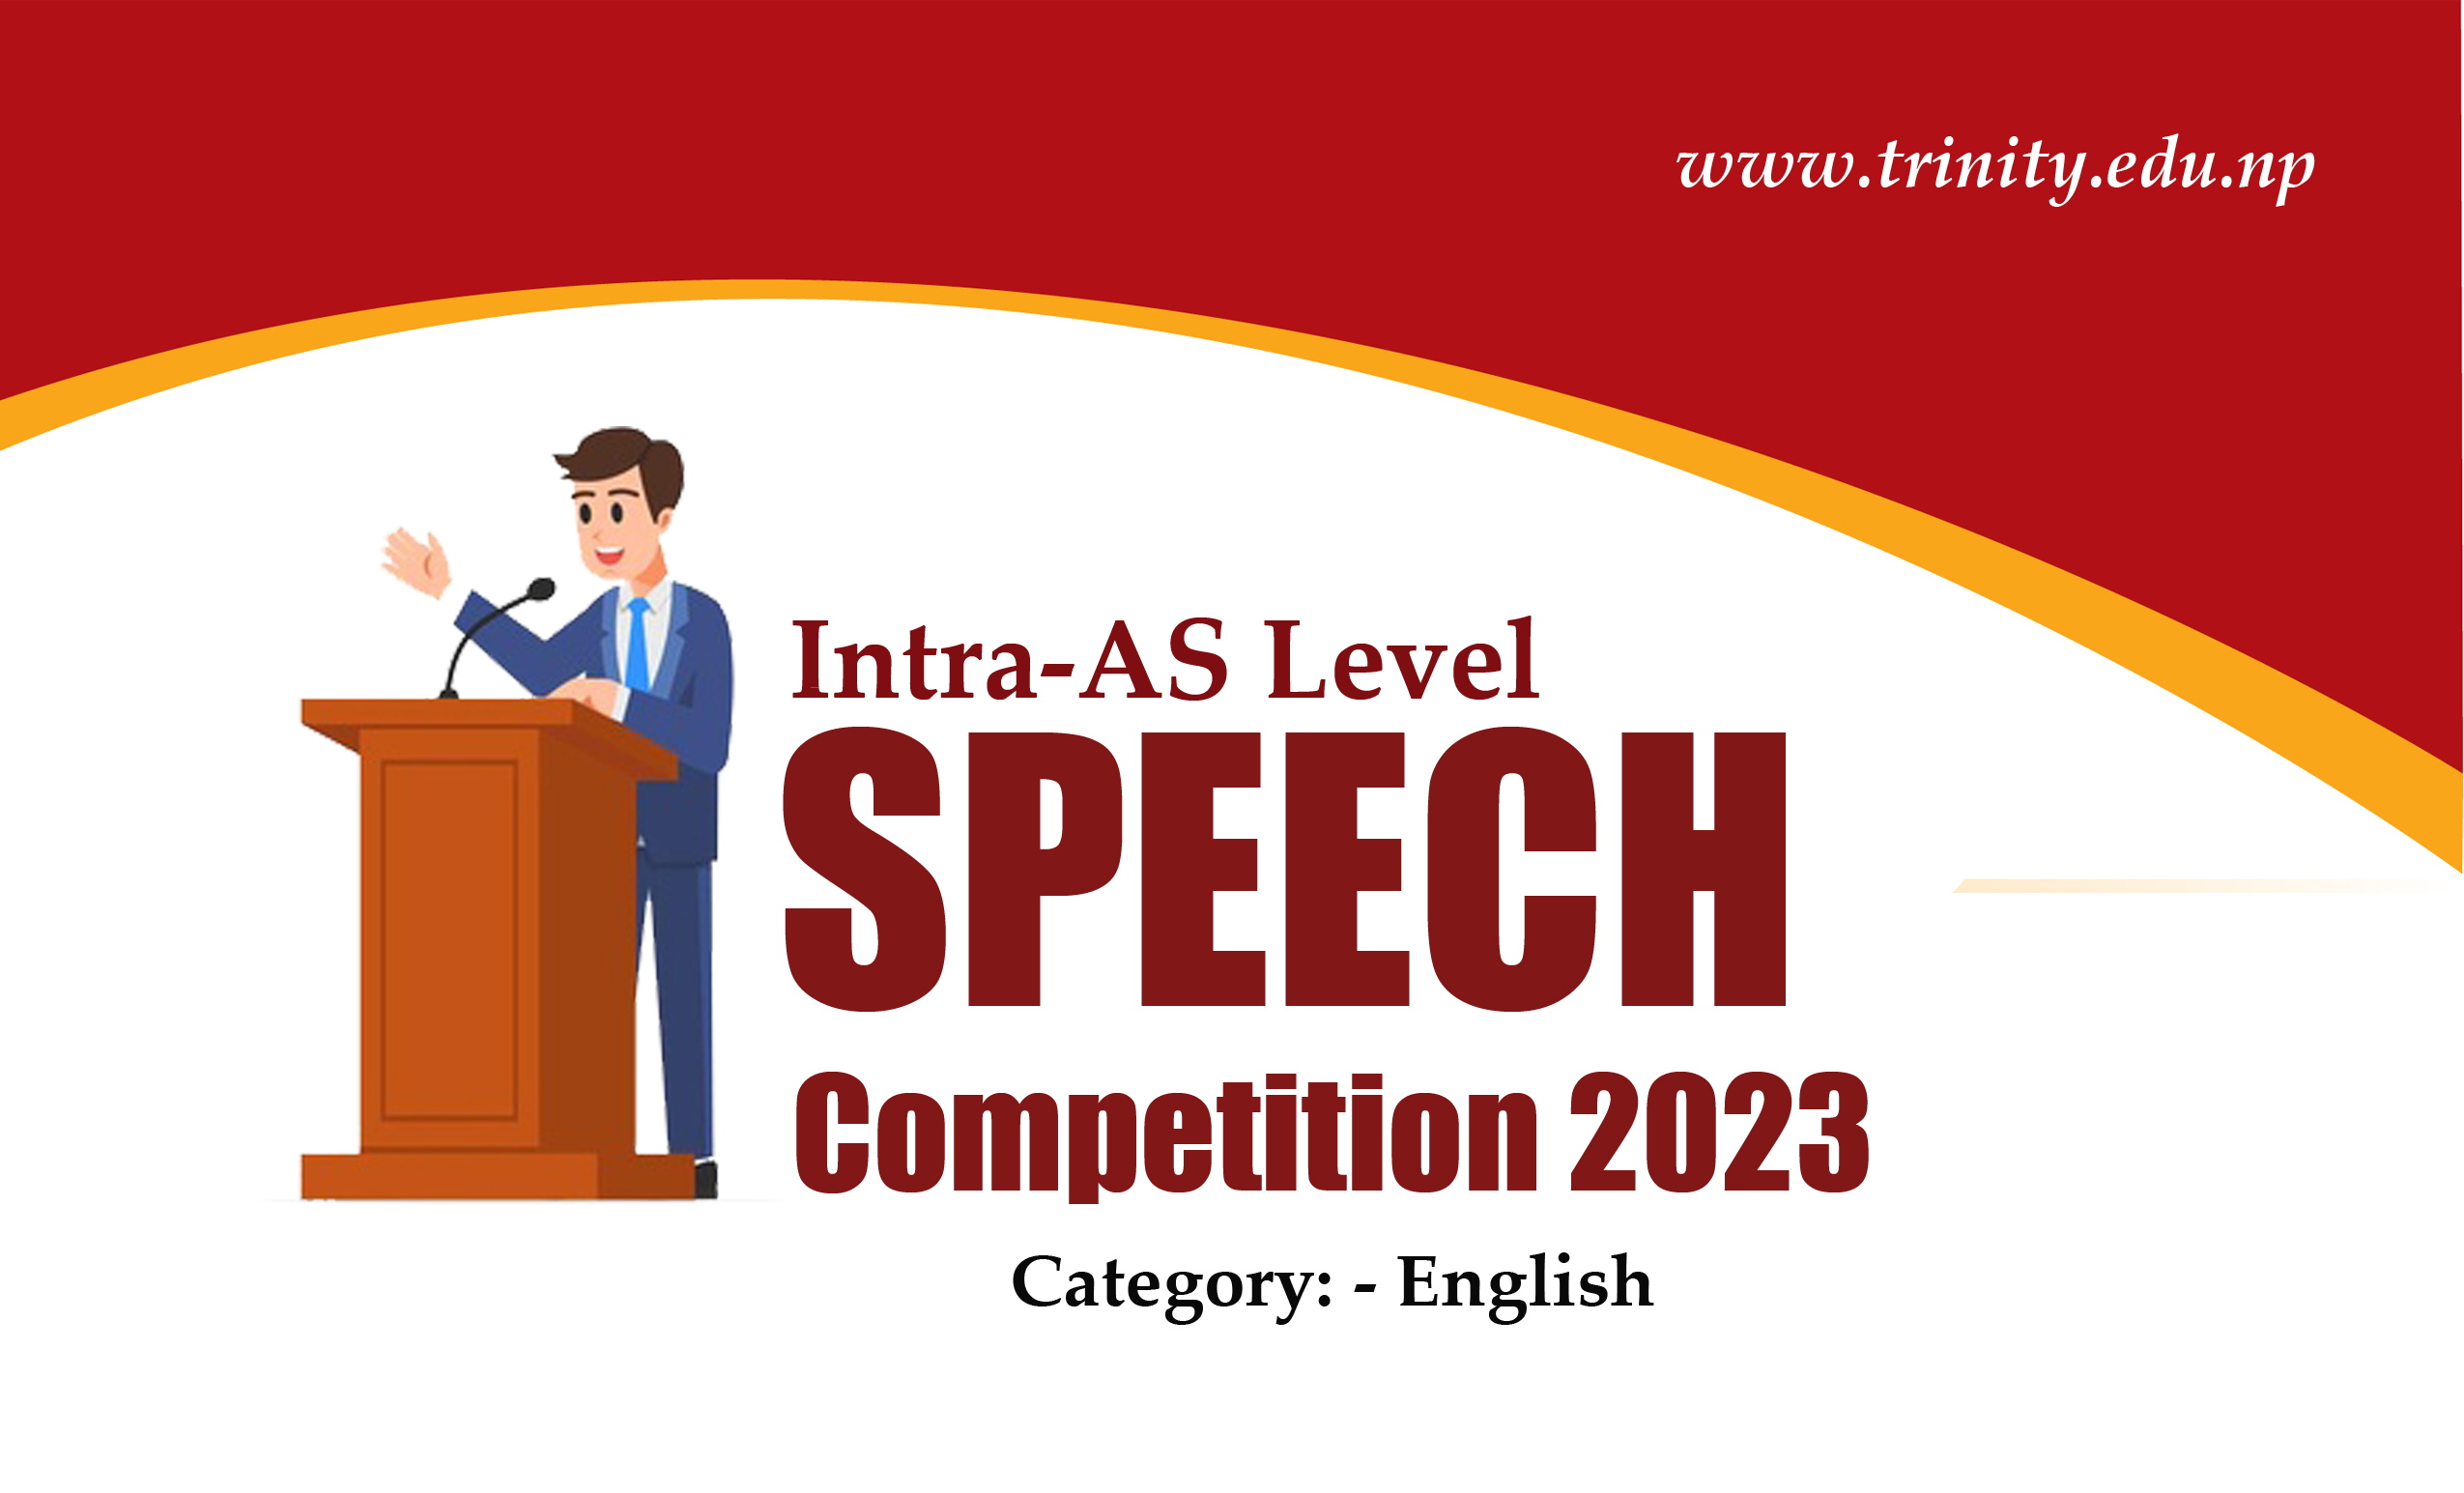 another name for speech competition